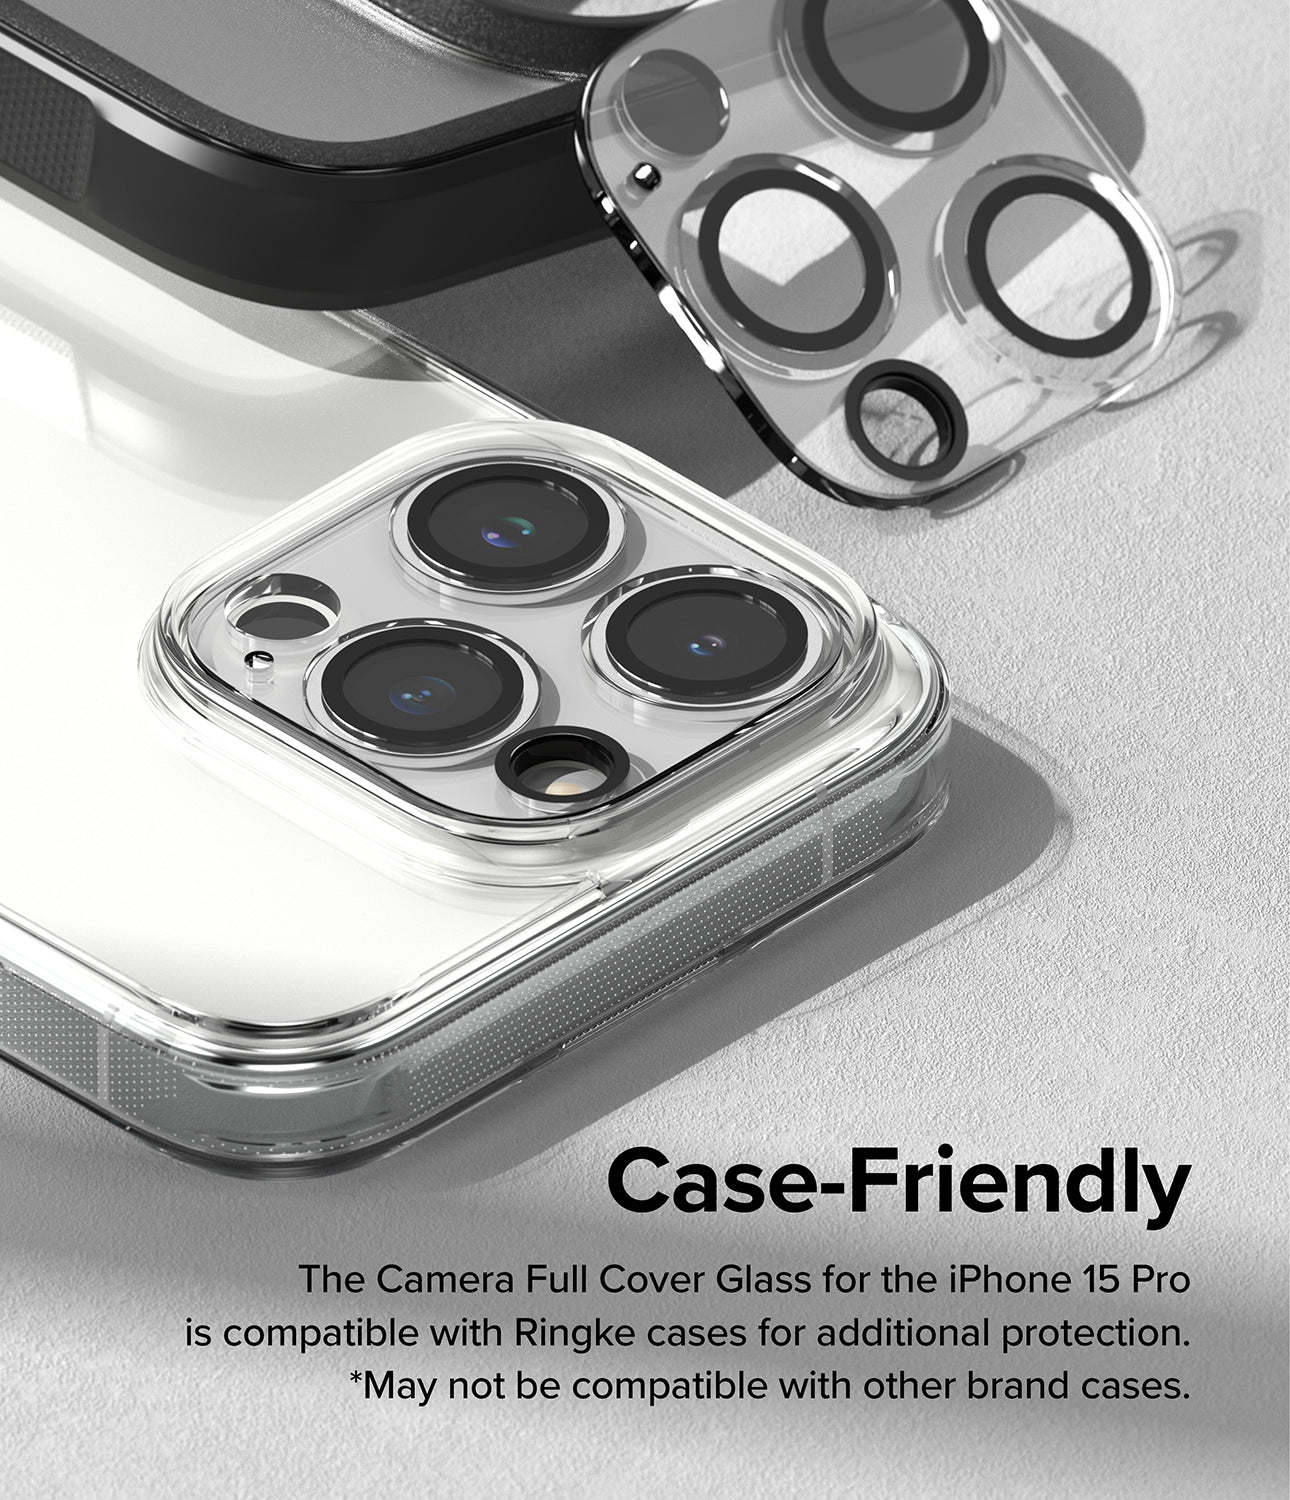 iPhone 15 Pro | Camera Protector Glass [2 Pack] - Case-Friendly. The Camera Full Cover Glass for the iPhone 15 Pro is compatible with Ringke cases for additional protection. May not be compatible with other brand cases.